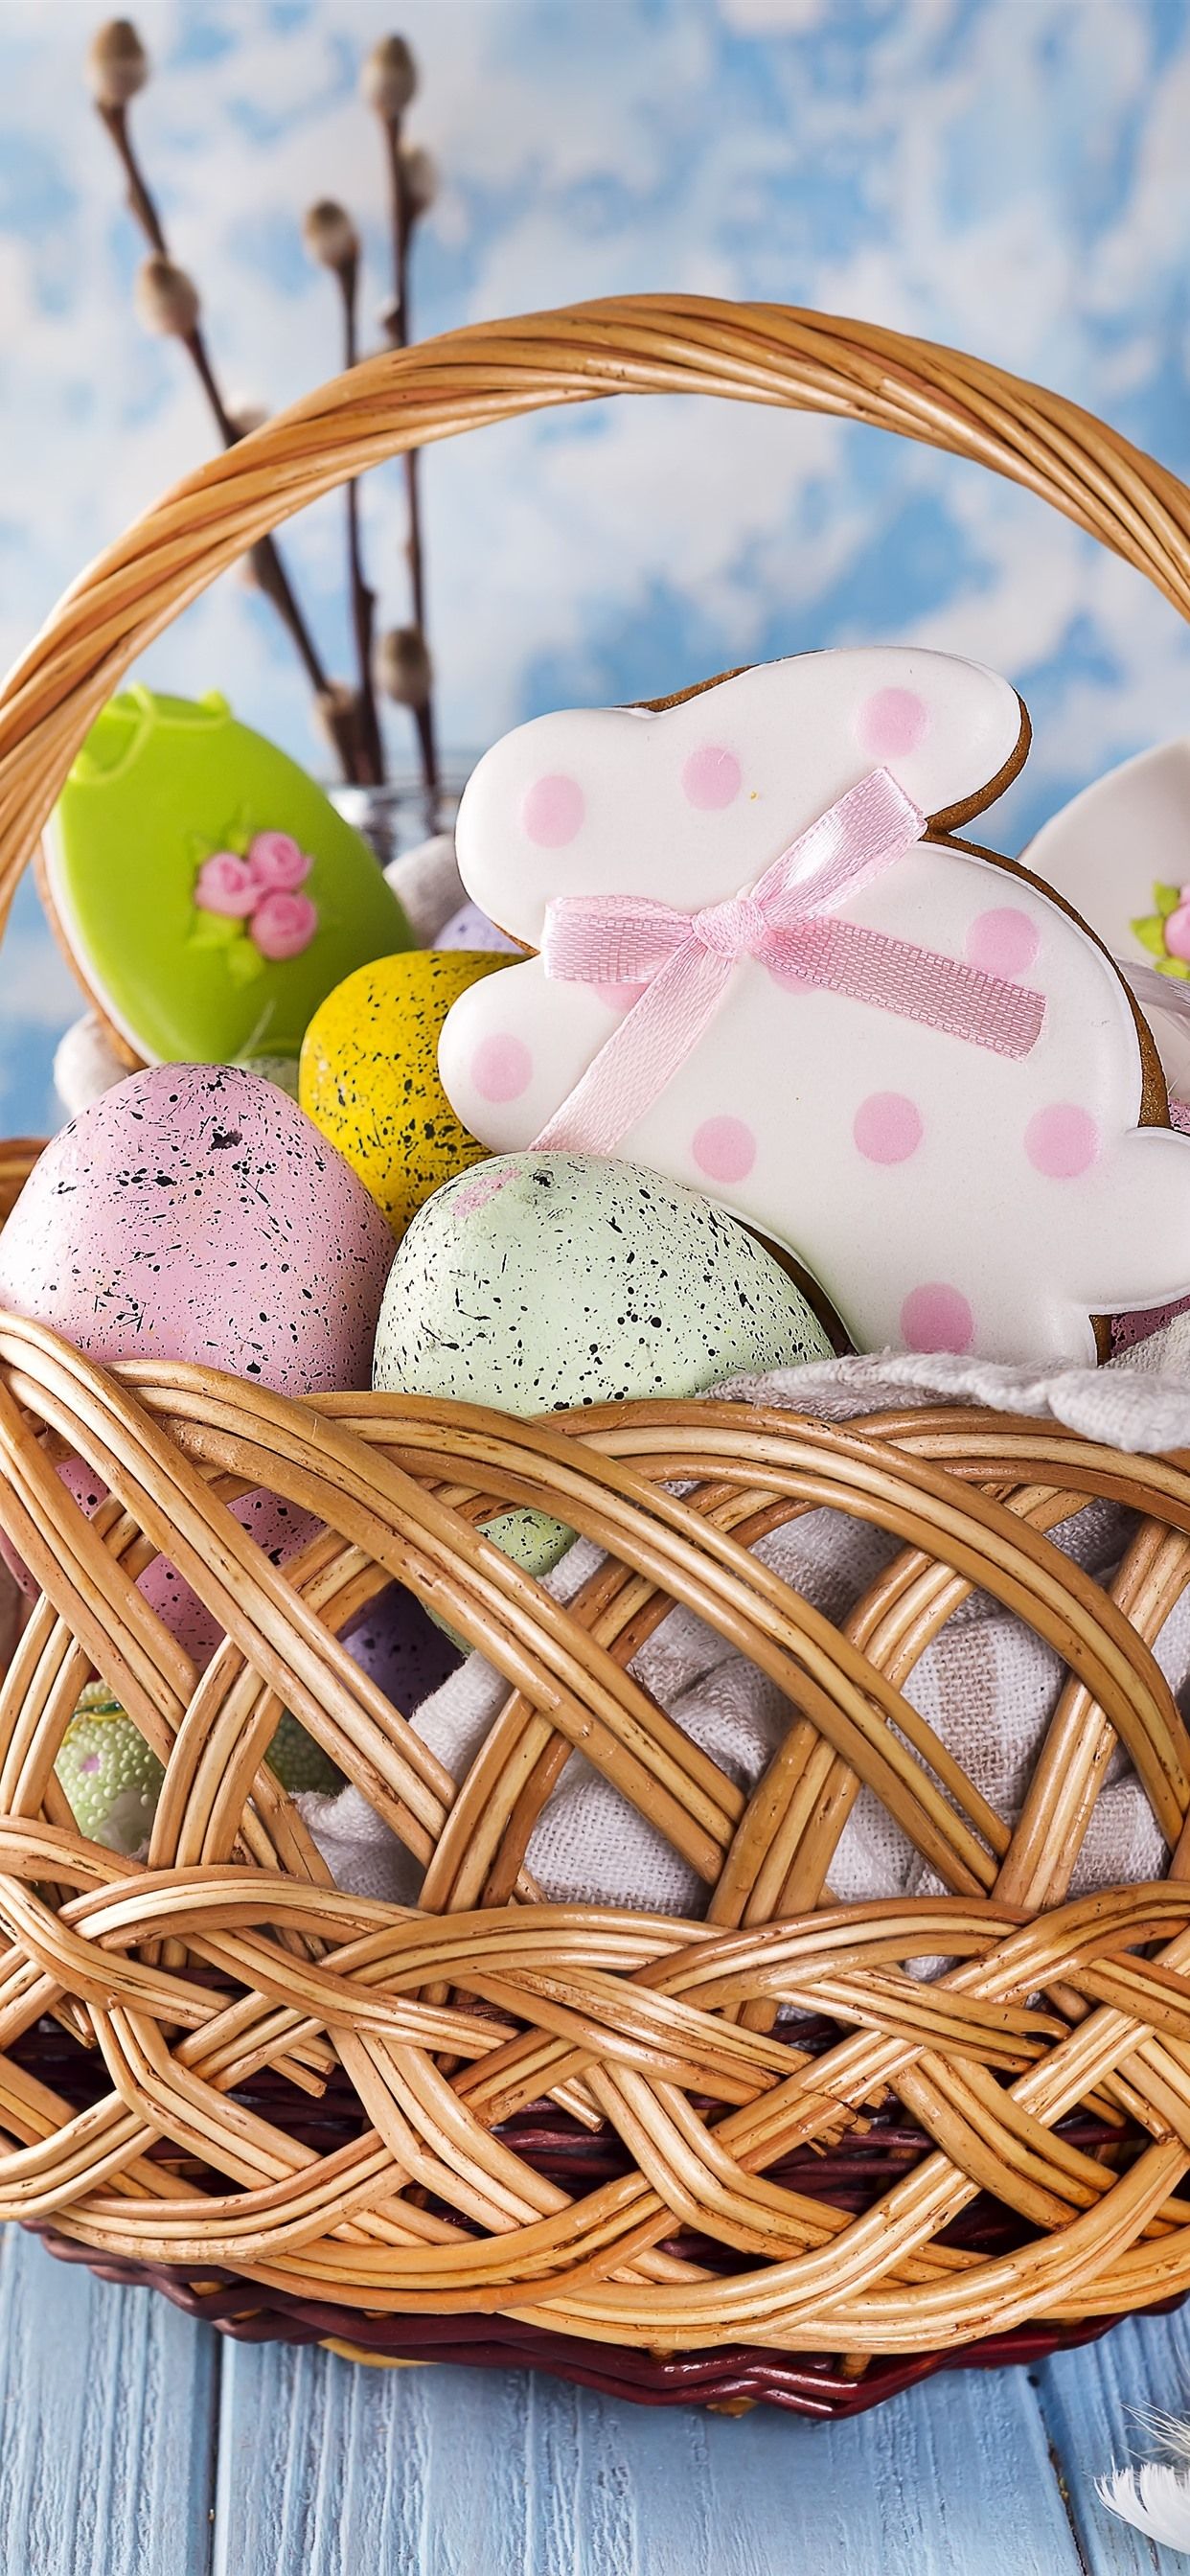 Happy Easter, Basket, Colorful Eggs, Rabbit Shape Cookies 1242x2688 IPhone 11 Pro XS Max Wallpaper, Background, Picture, Image